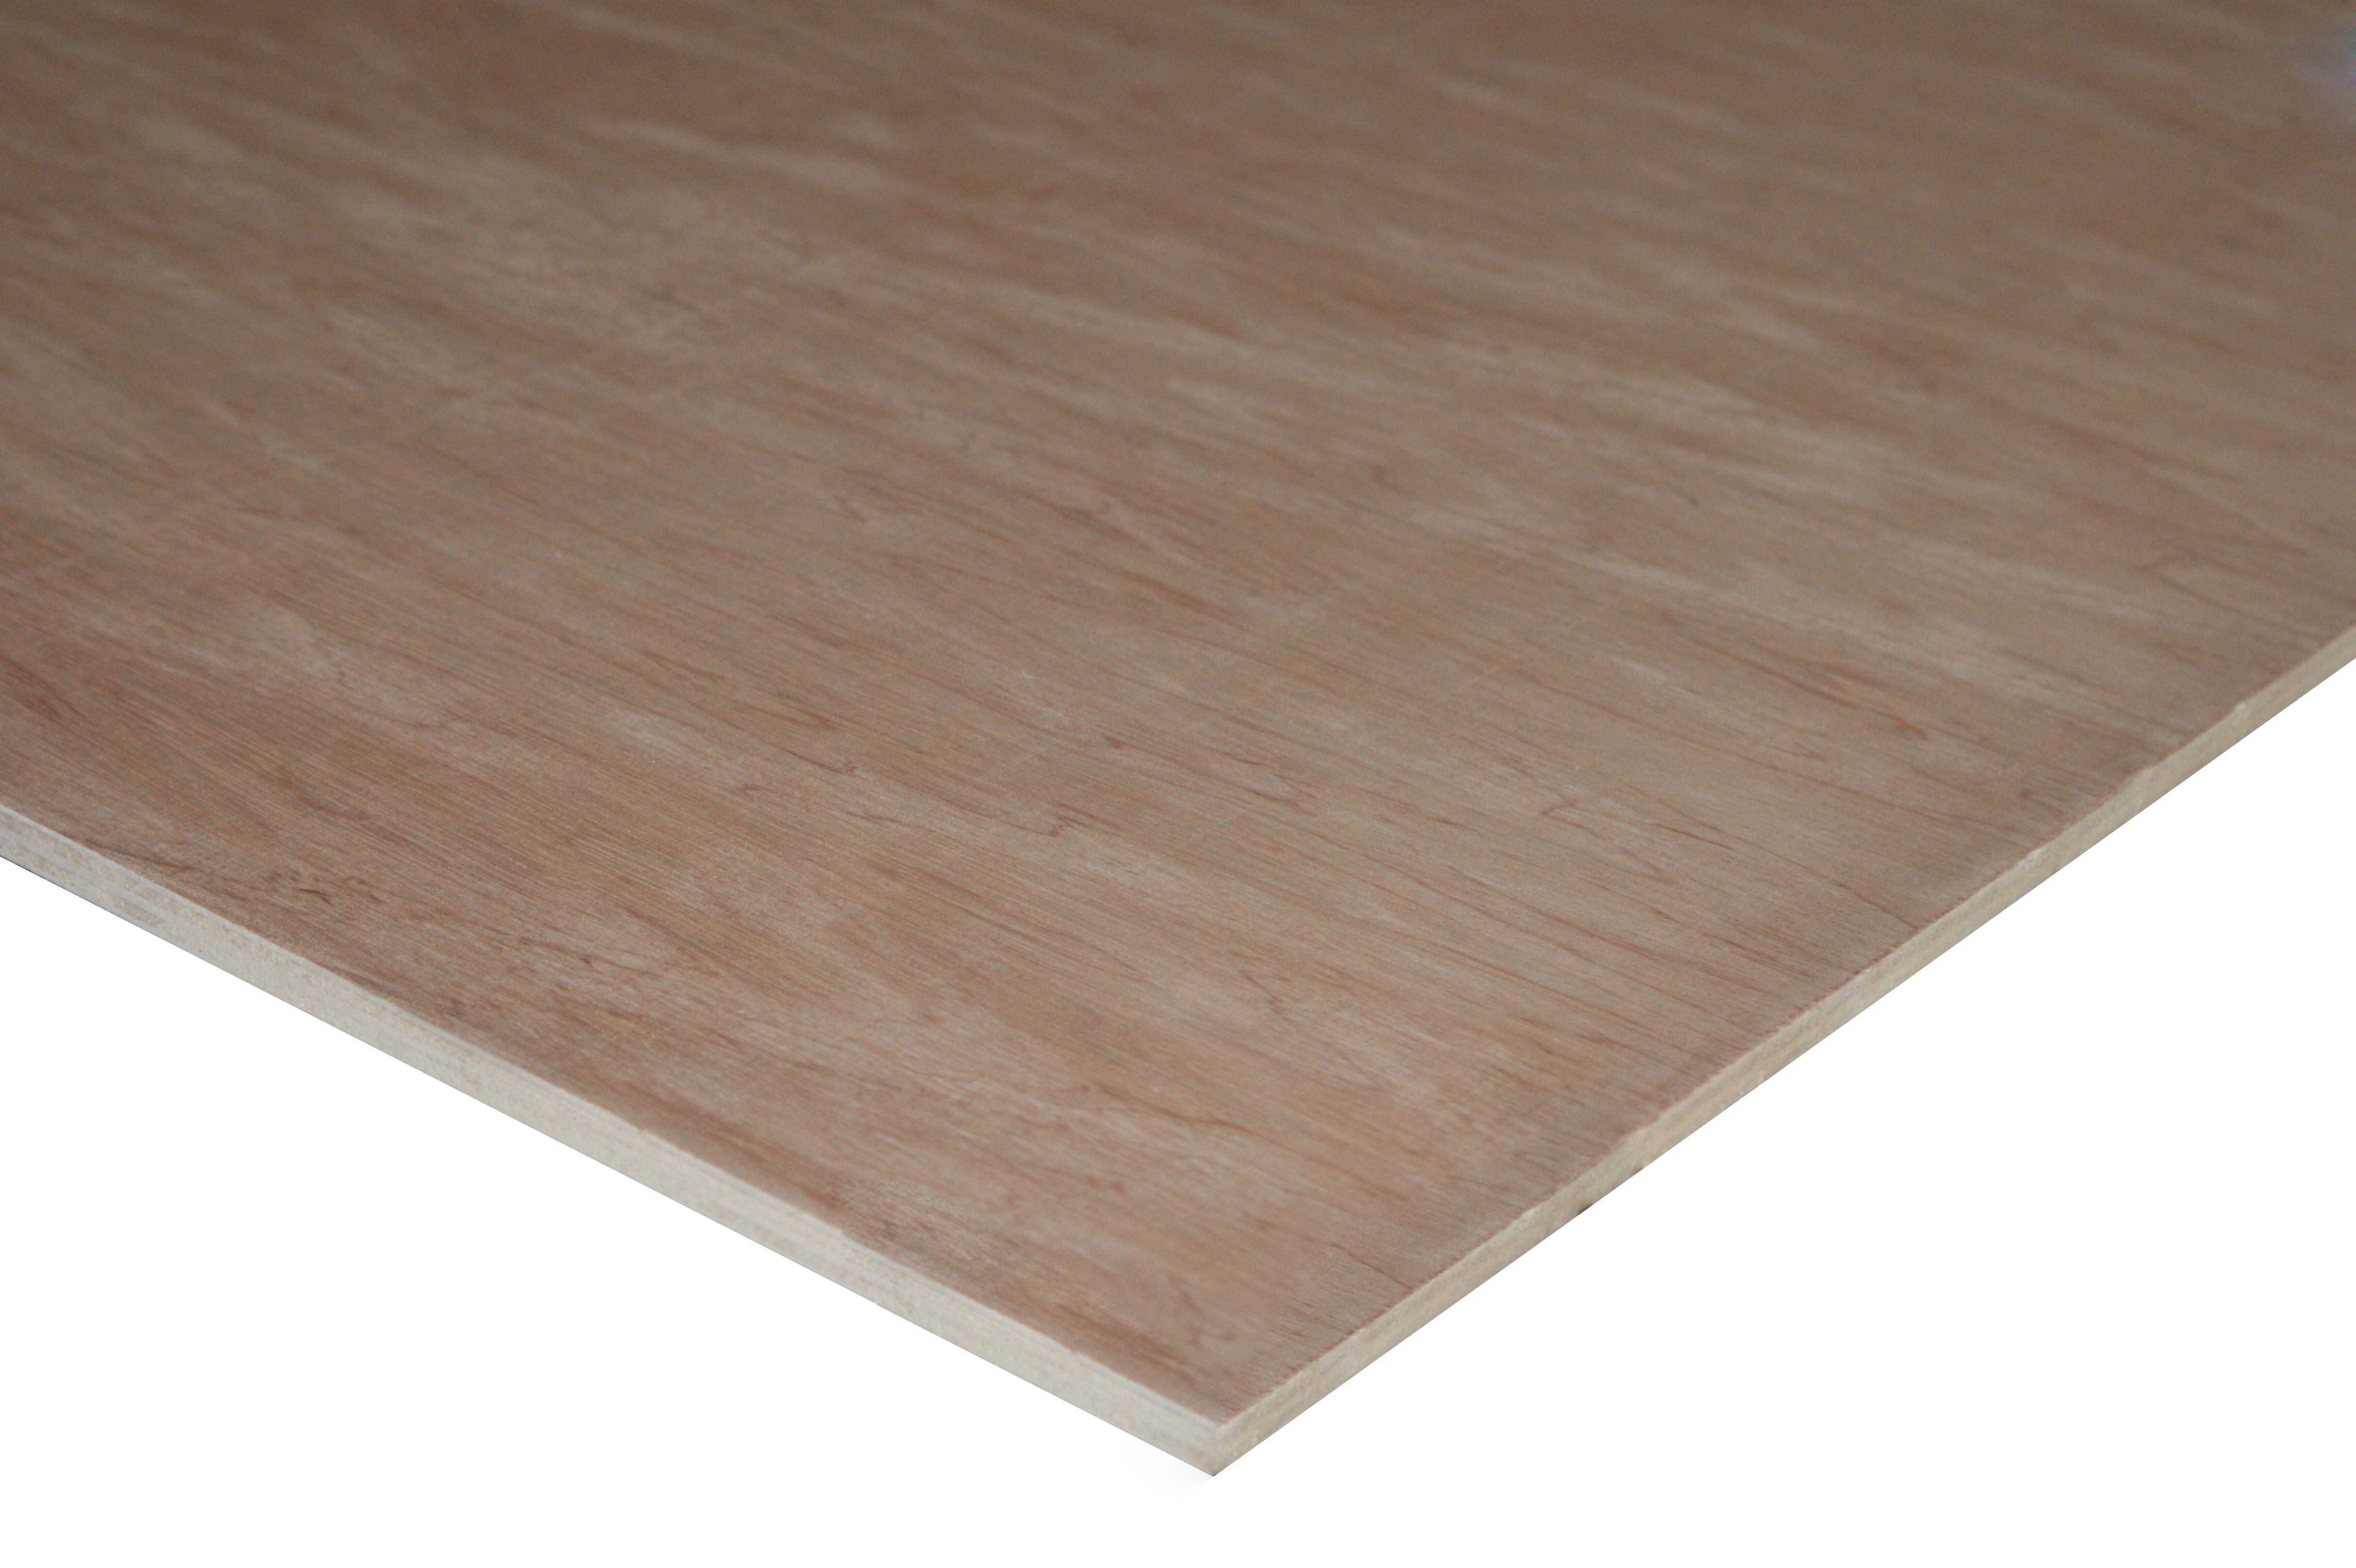 Image of Wickes Non-Structural Hardwood Plywood - 9 x 607 x 1220mm